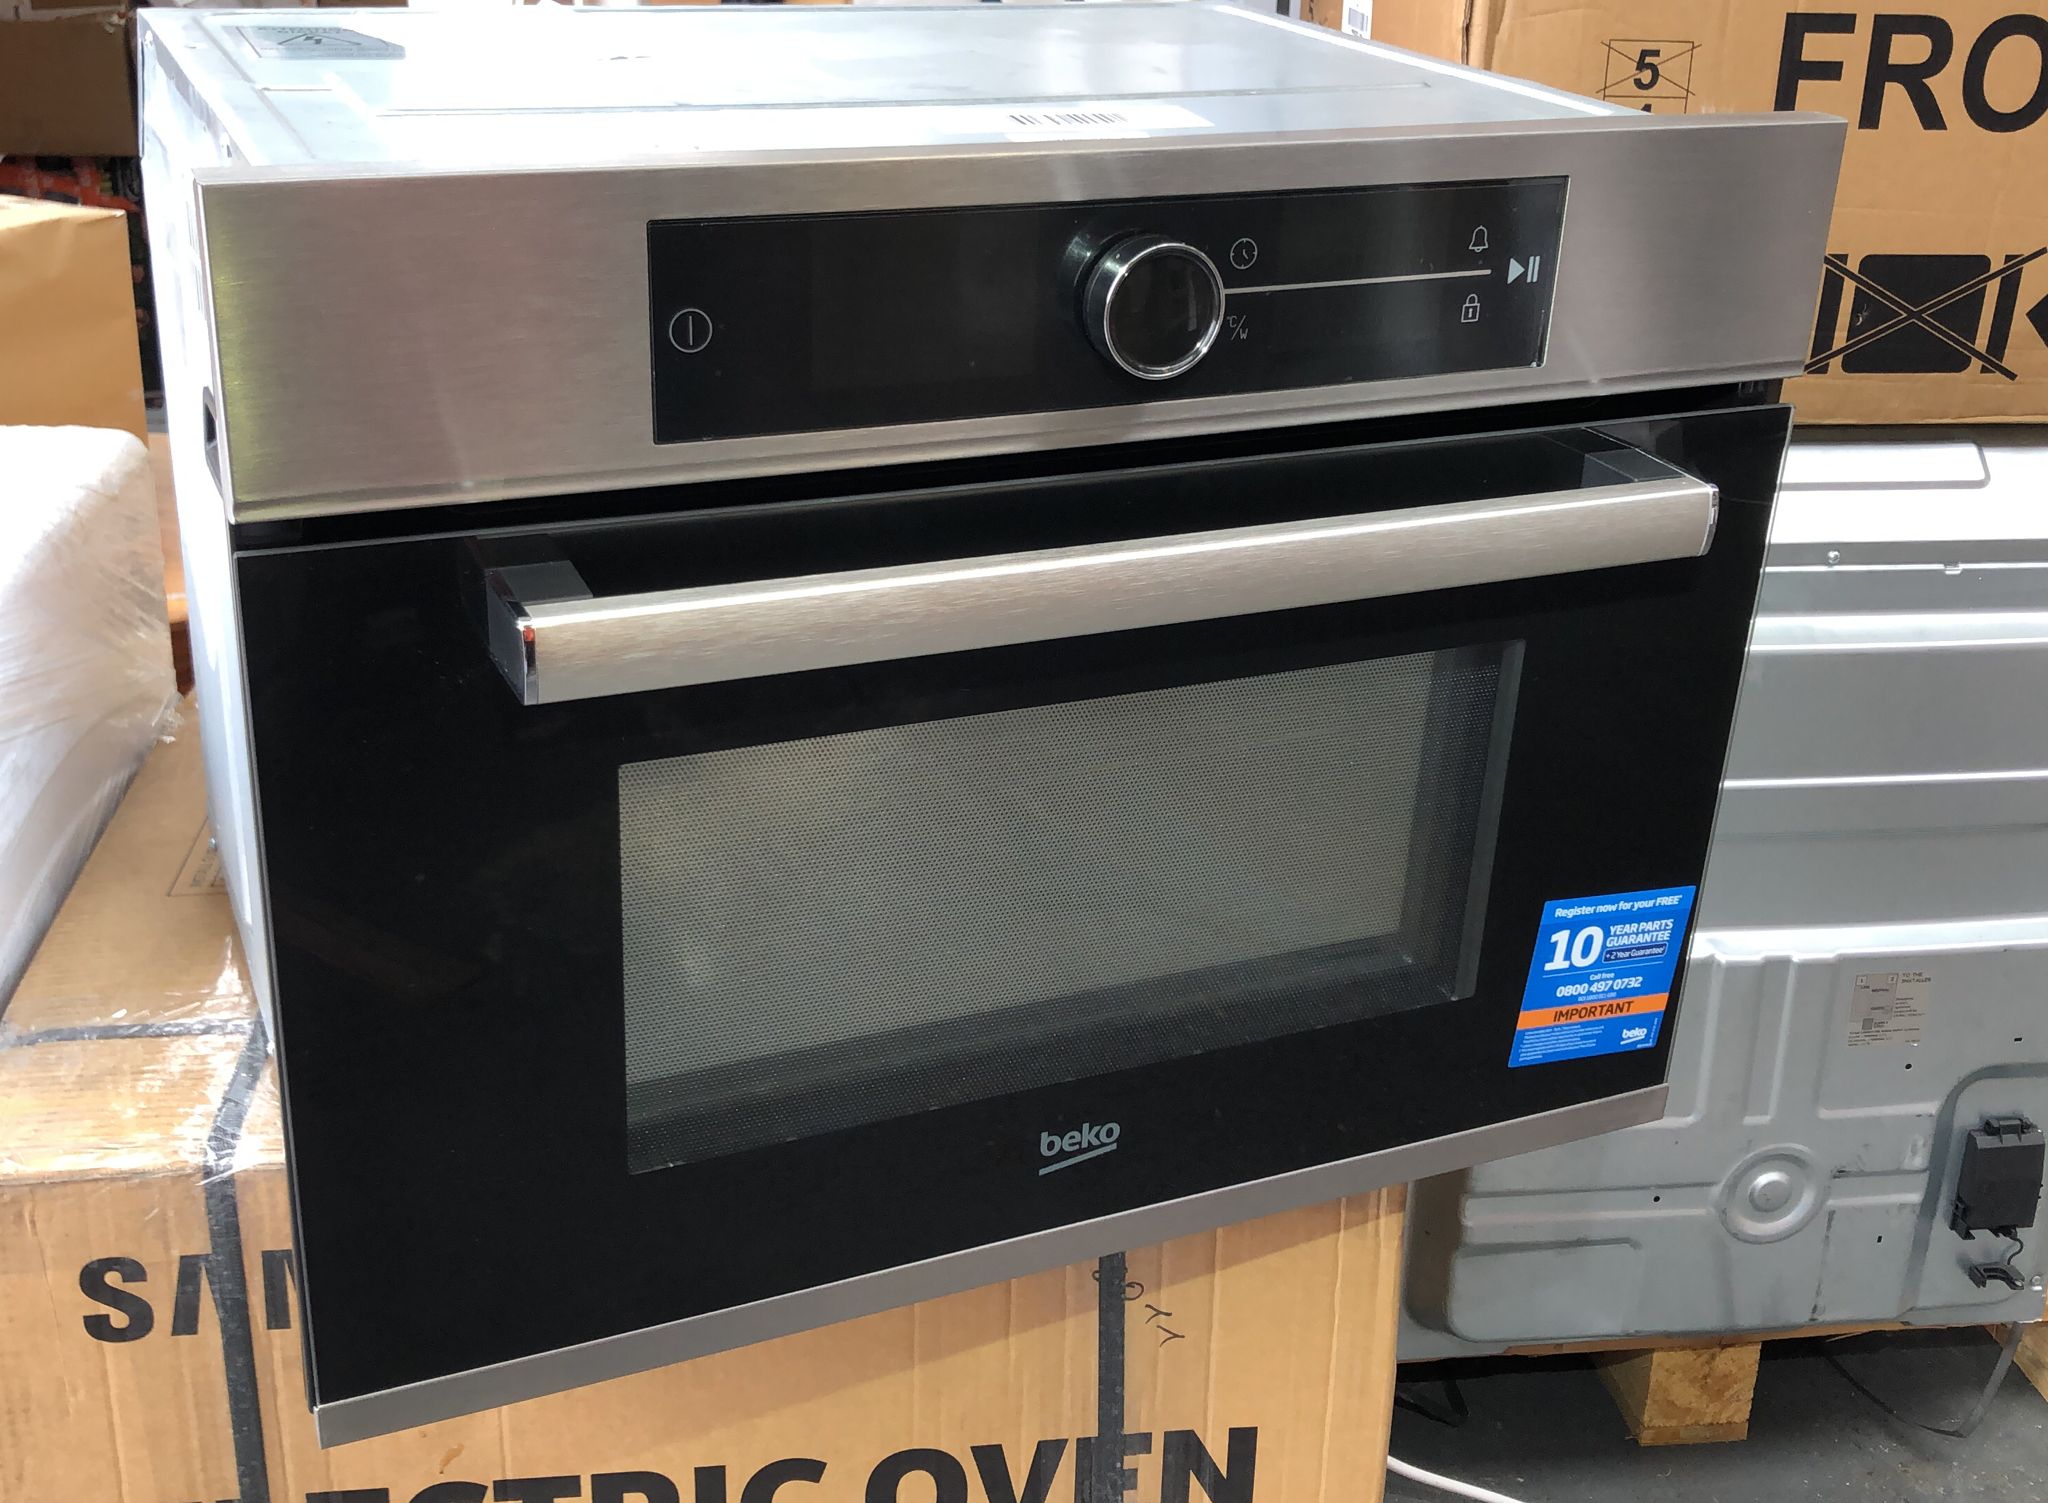 Beko-Oven with microwave-Stainless steel-Built-in- BBCW12400X-6488